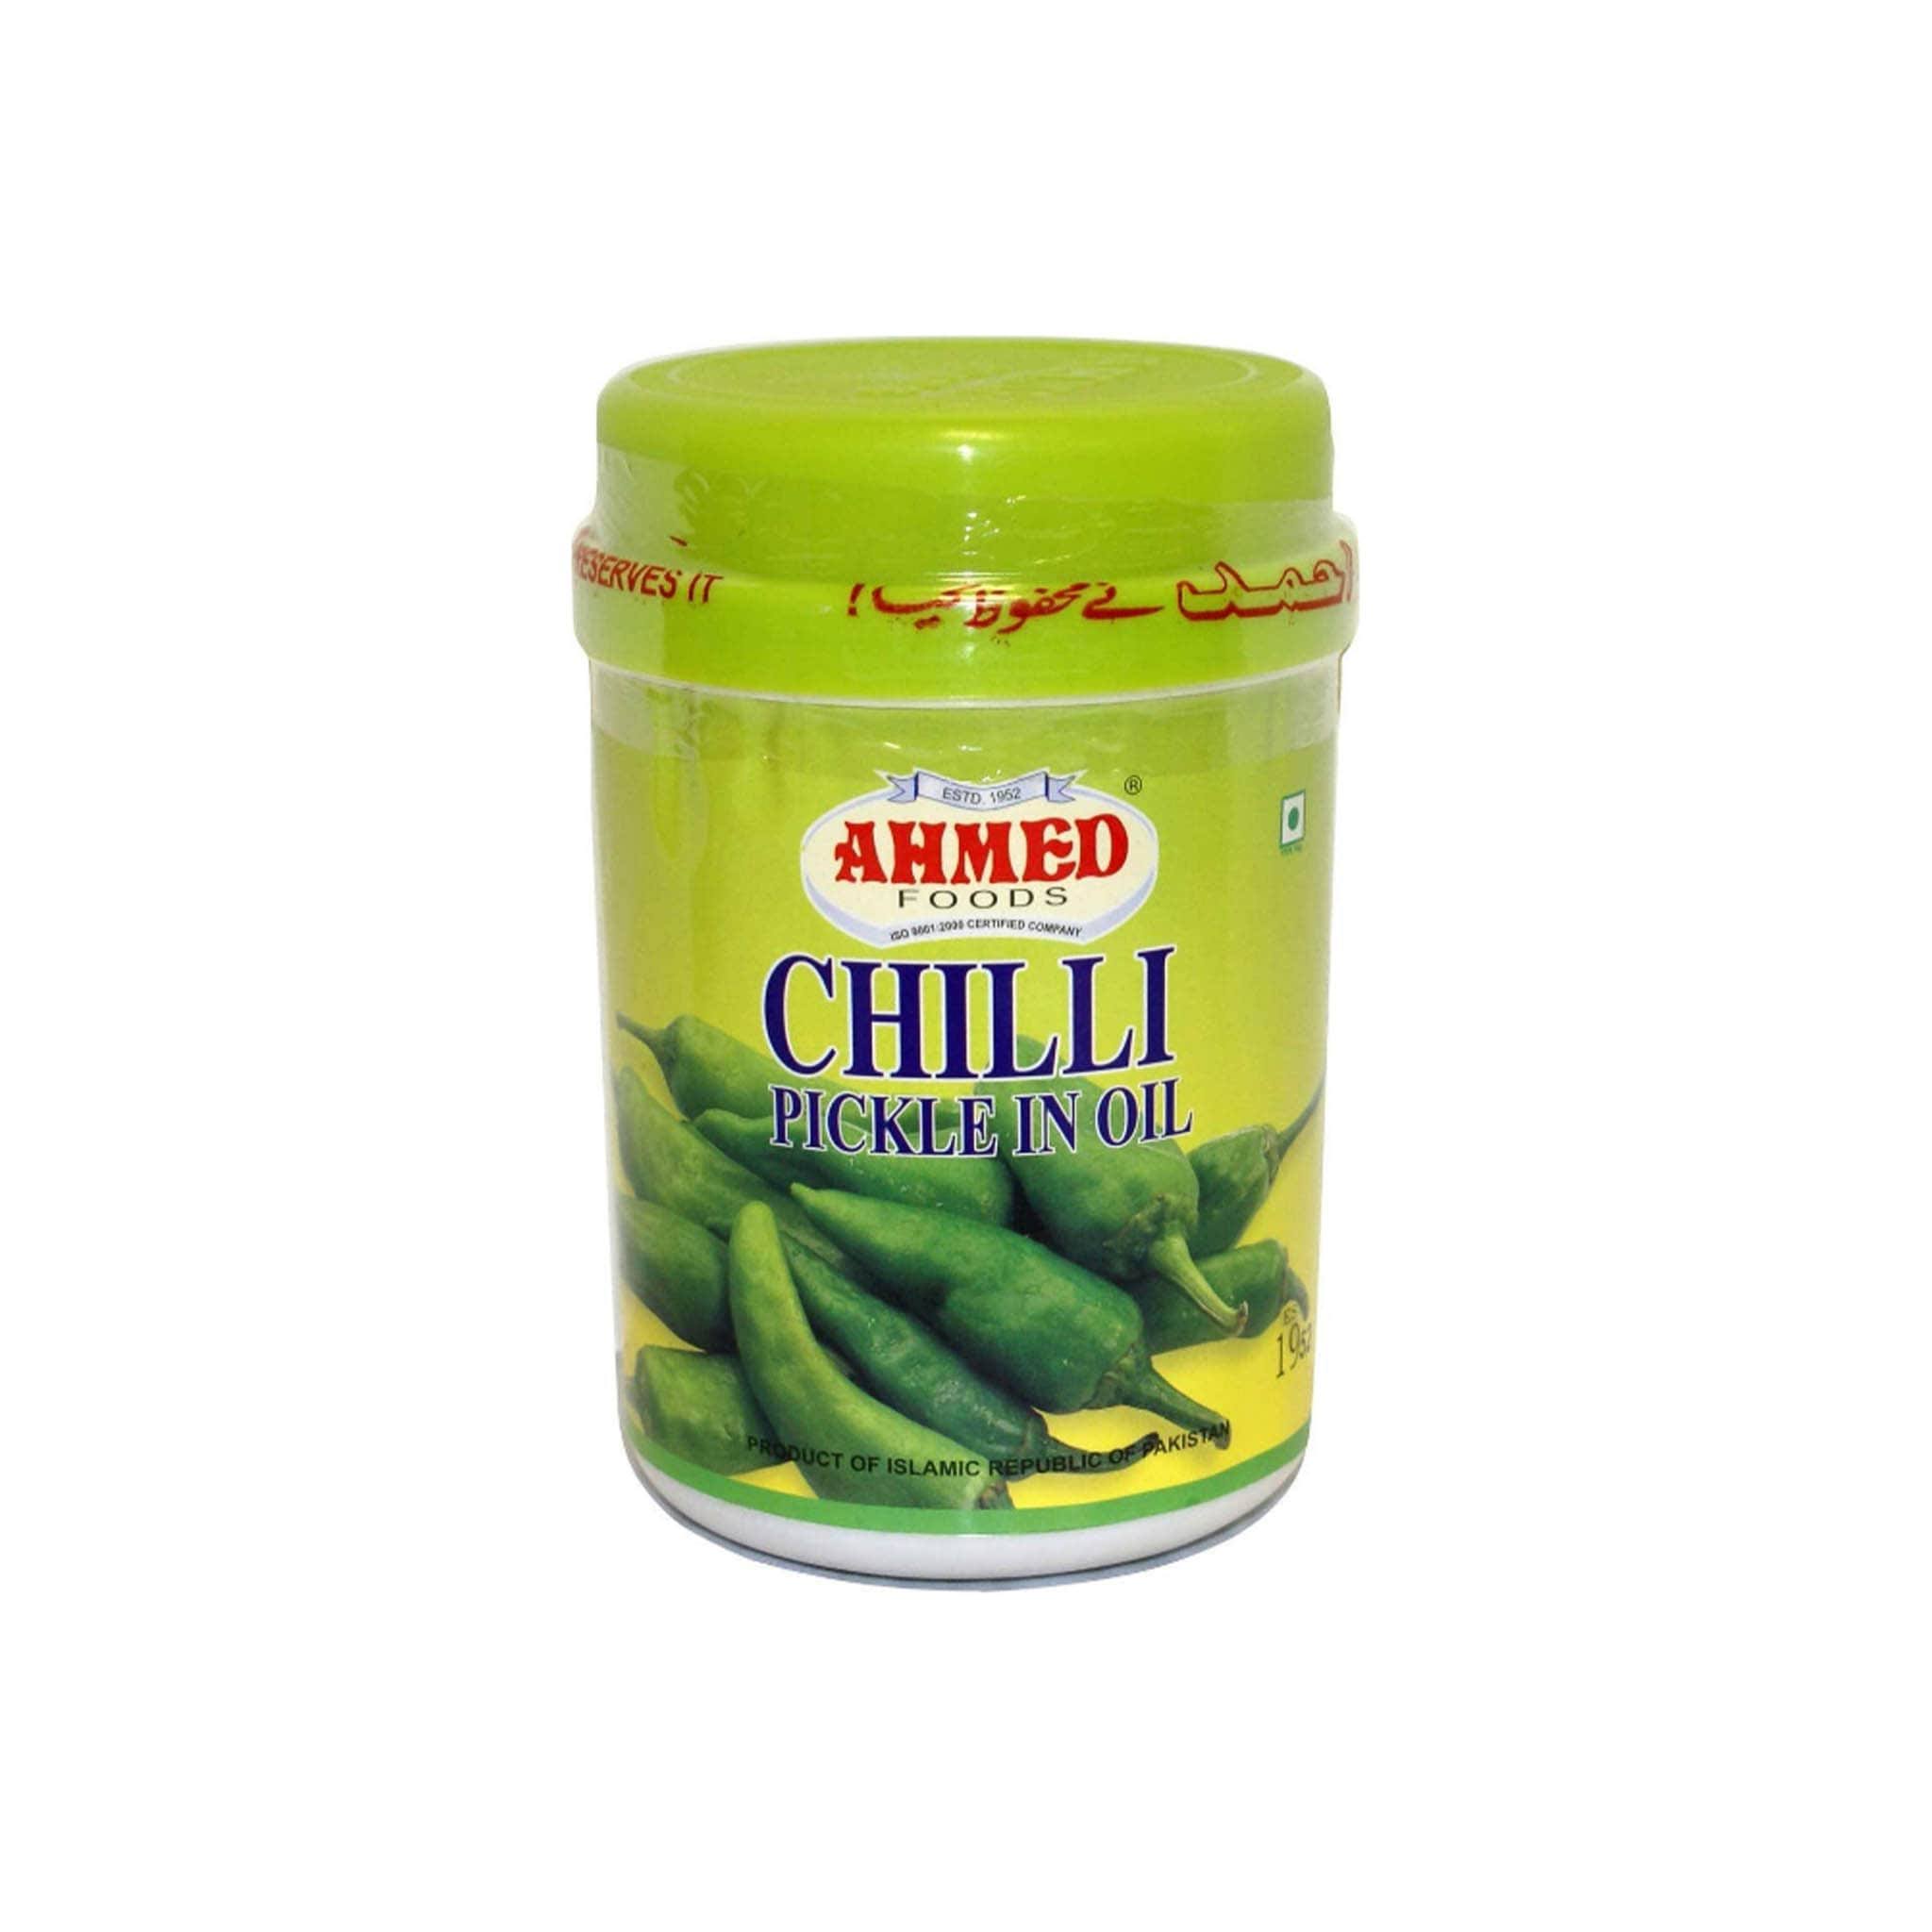 Ahmed Foods Chilli Pickle In Oil - 1kg